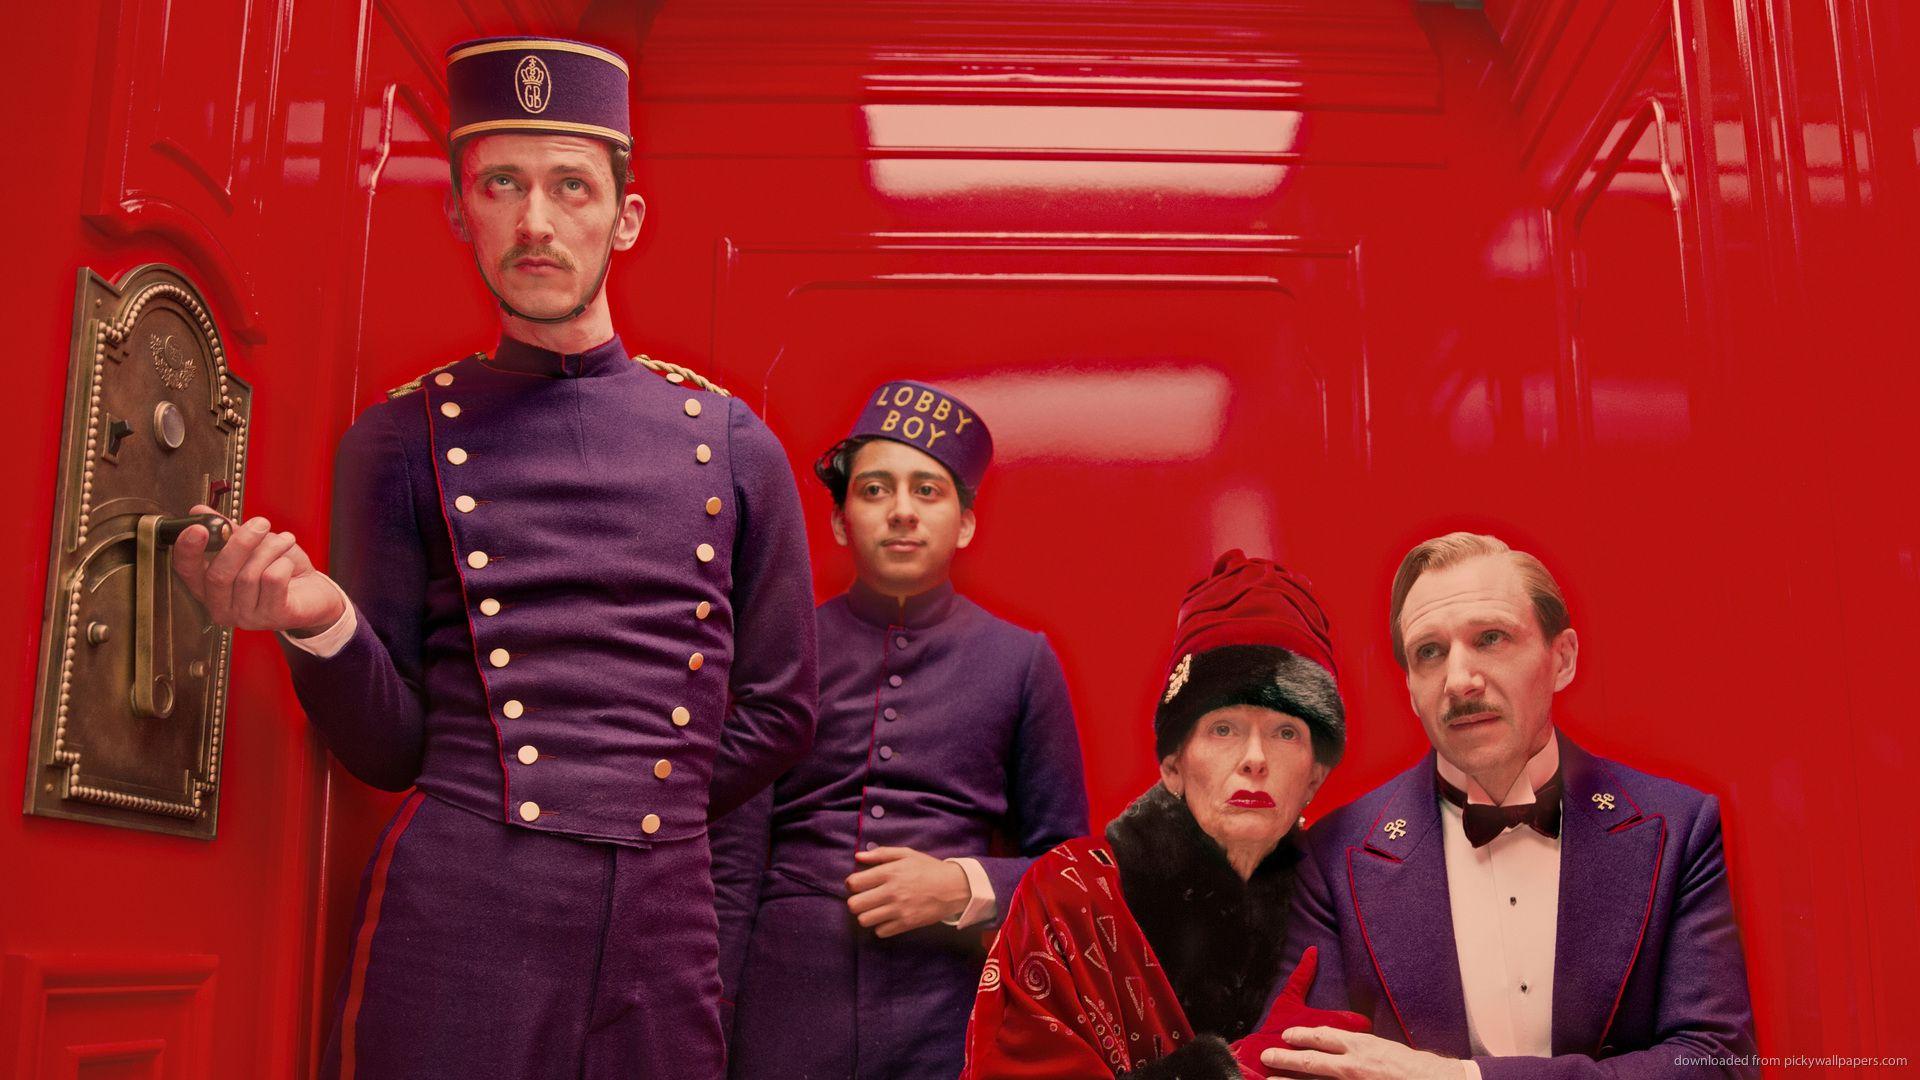 Download 1920x1080 The Grand Budapest Hotel Elevator Wallpaper